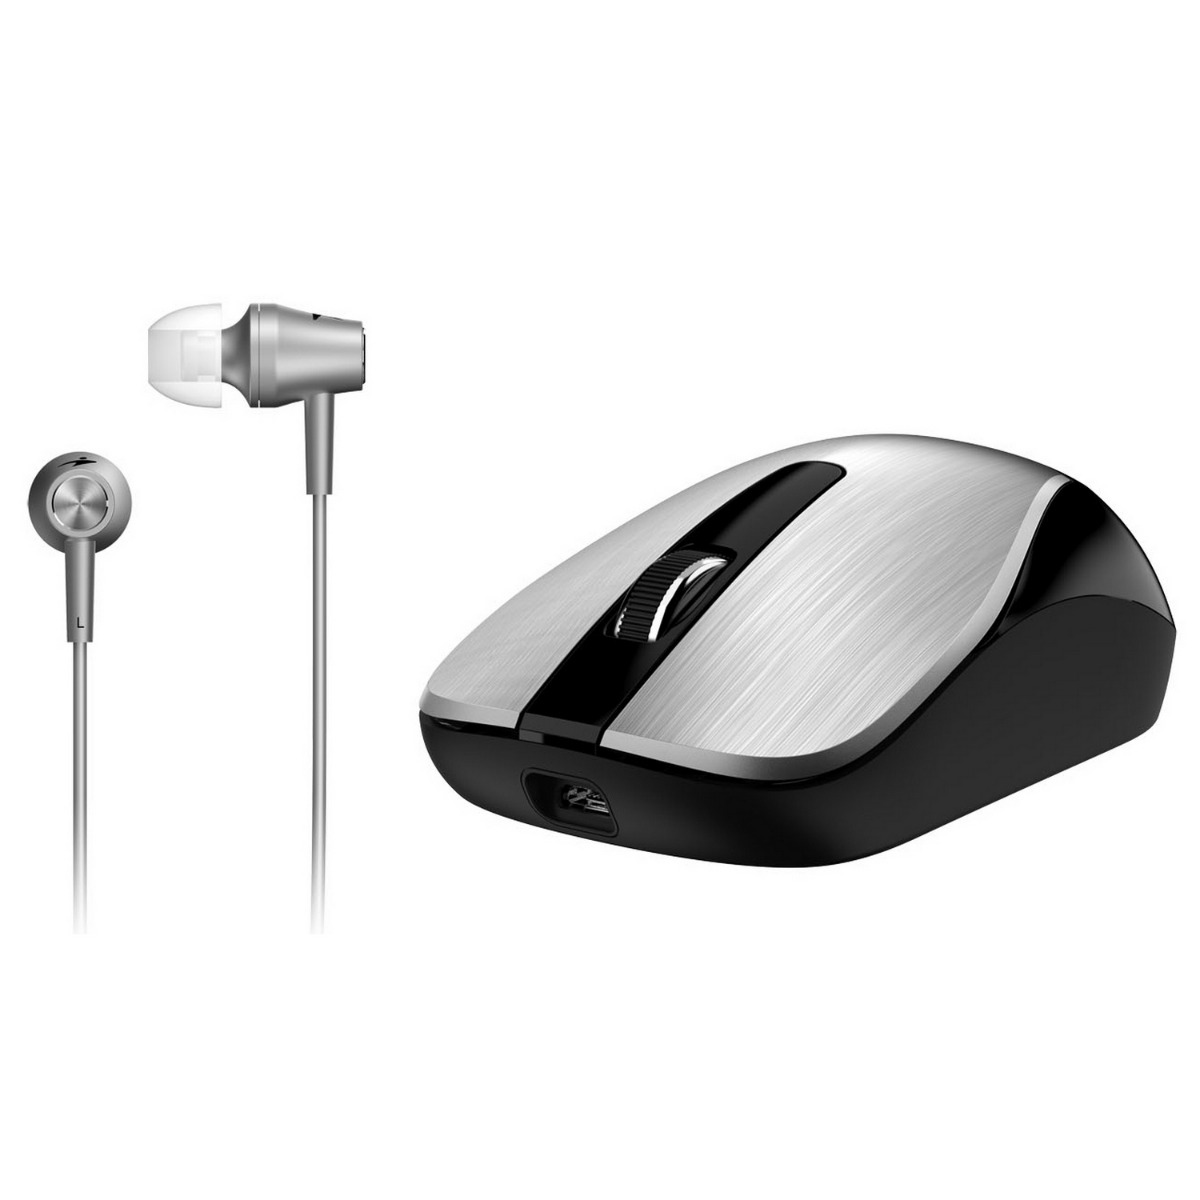 Genius Wireless Mouse + Headset (Silver) MH-8015